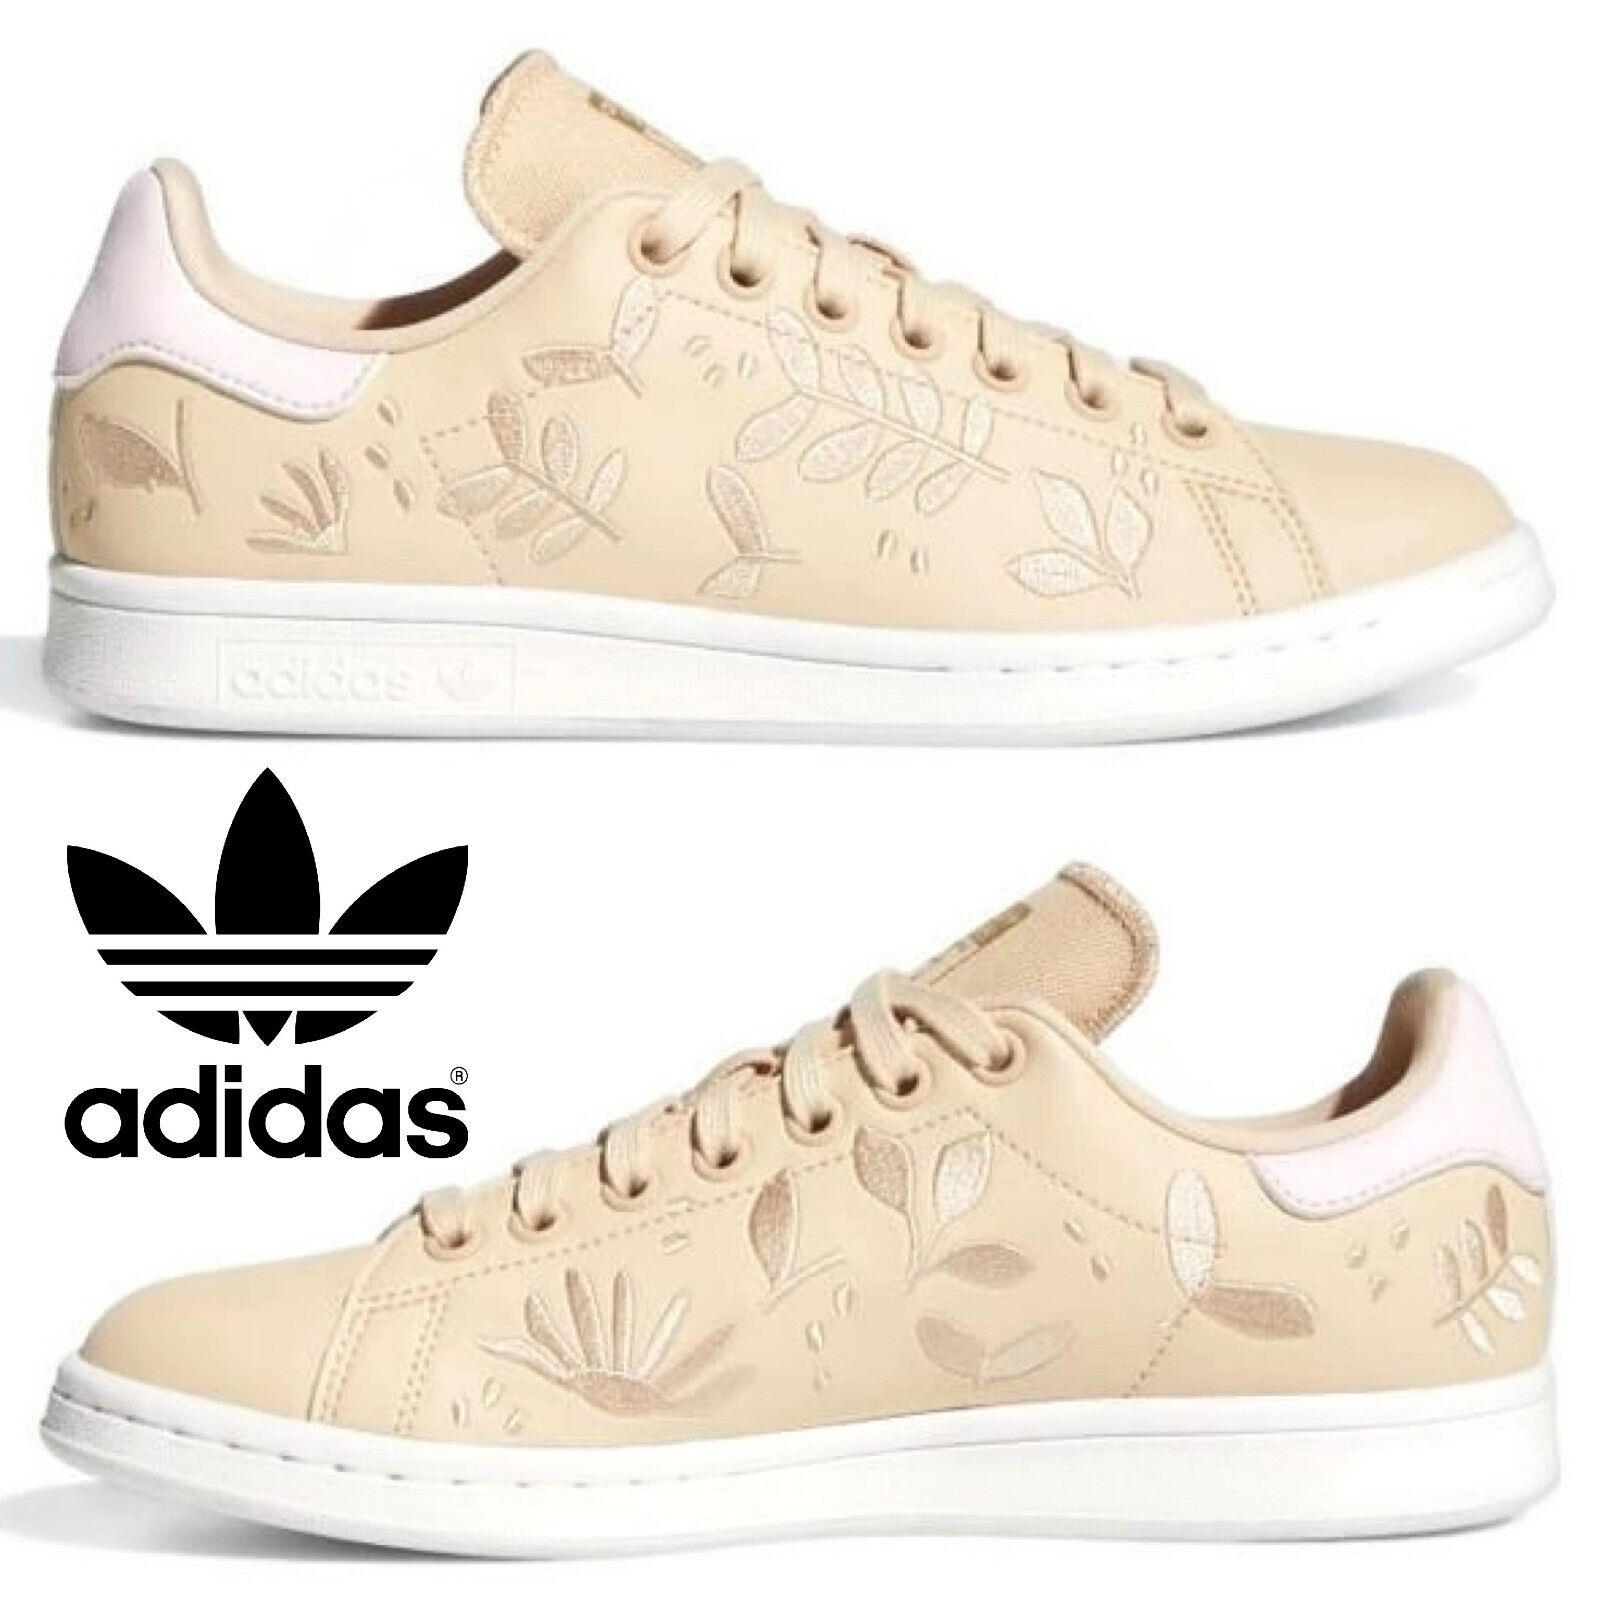 Adidas Originals Stan Smith Women s Sneakers Casual Shoes Sport Gym Halo Blush